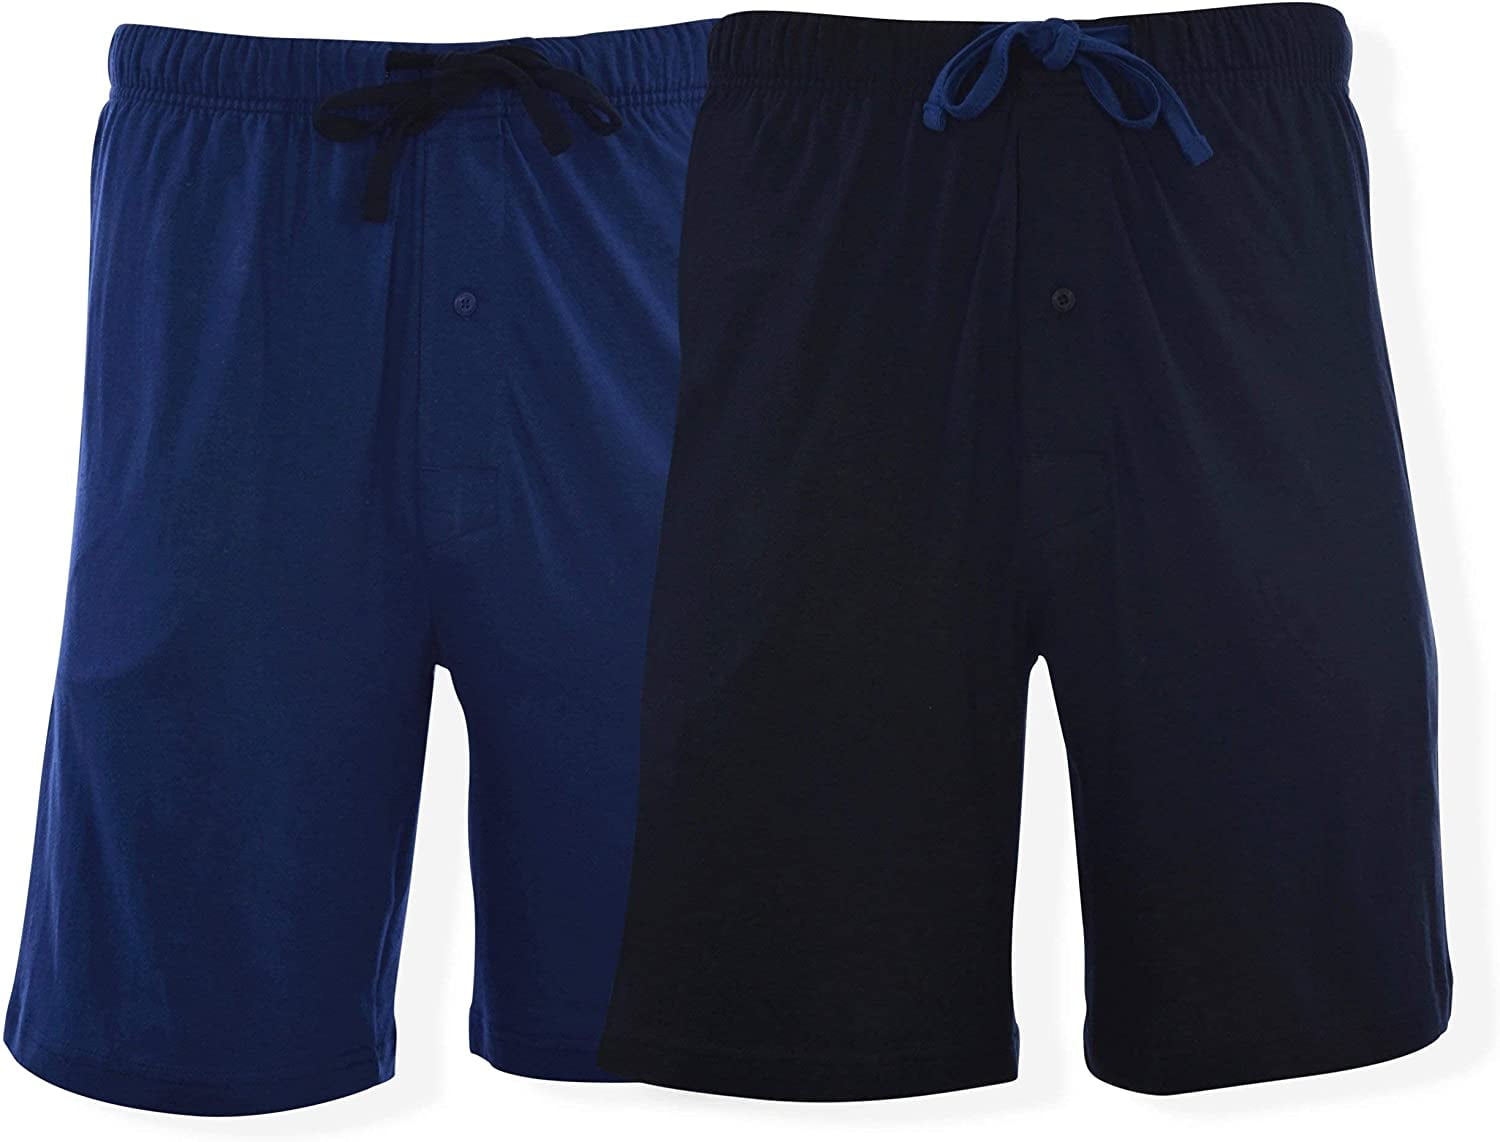 Hanes Men's 2-Pack Cotton Knit Shorts Waistband & Pockets, Assorted ...